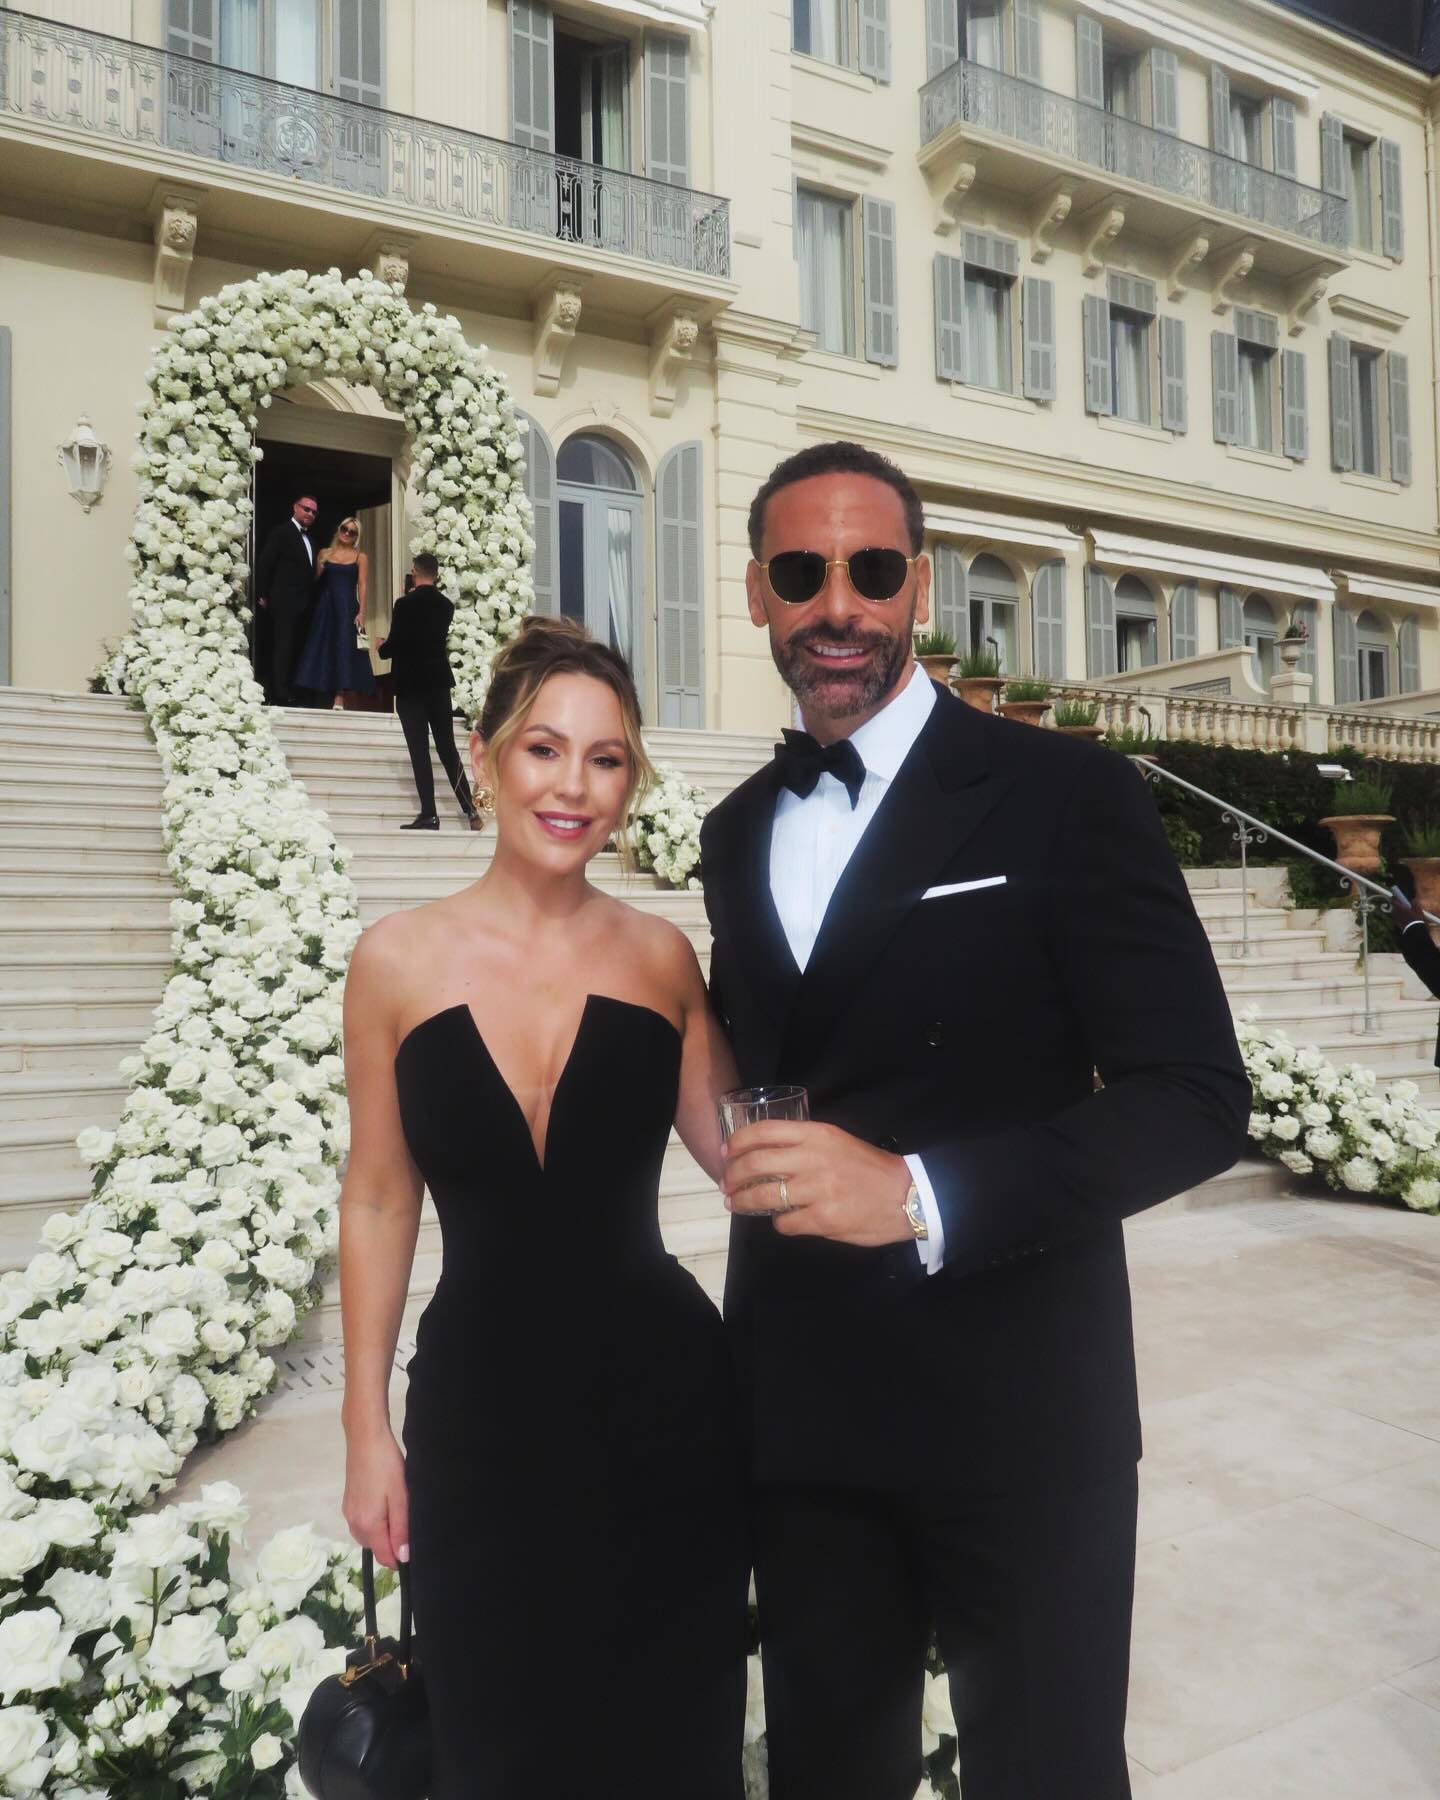 Rio Ferdinand and wife Kate at Umar's star studded wedding